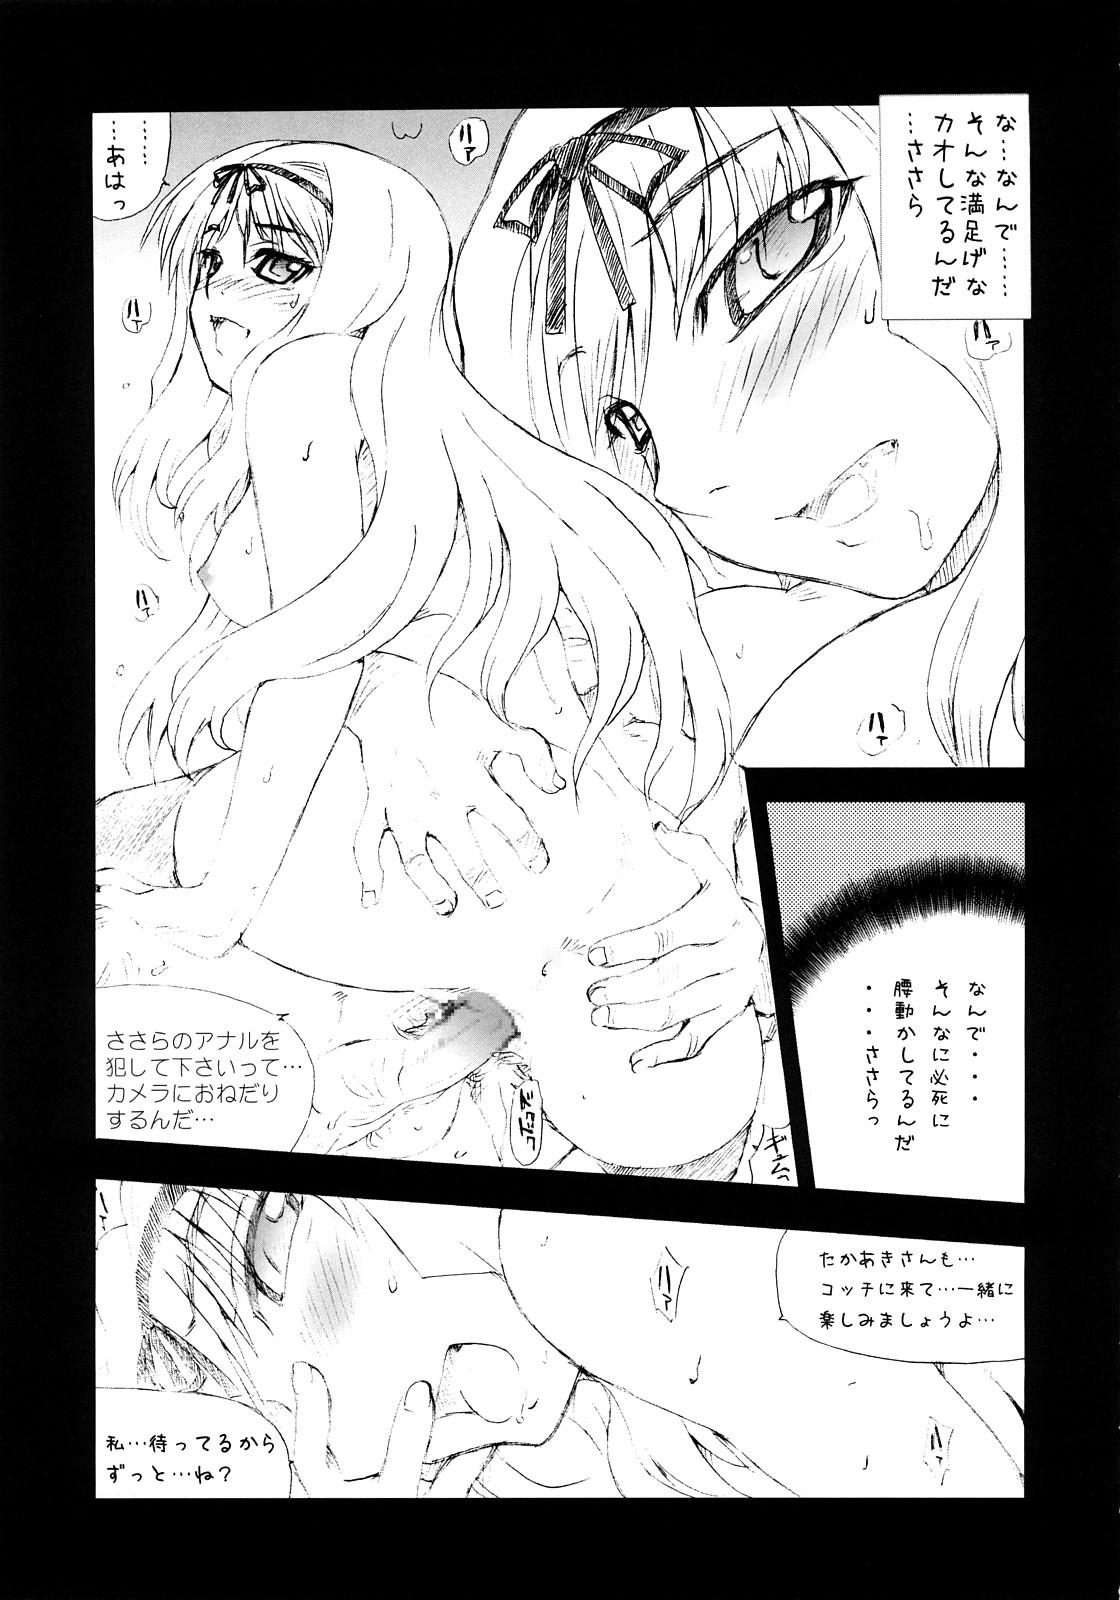 Stretch Kaicyo ver. 1.0 - Toheart2 Extreme - Page 24